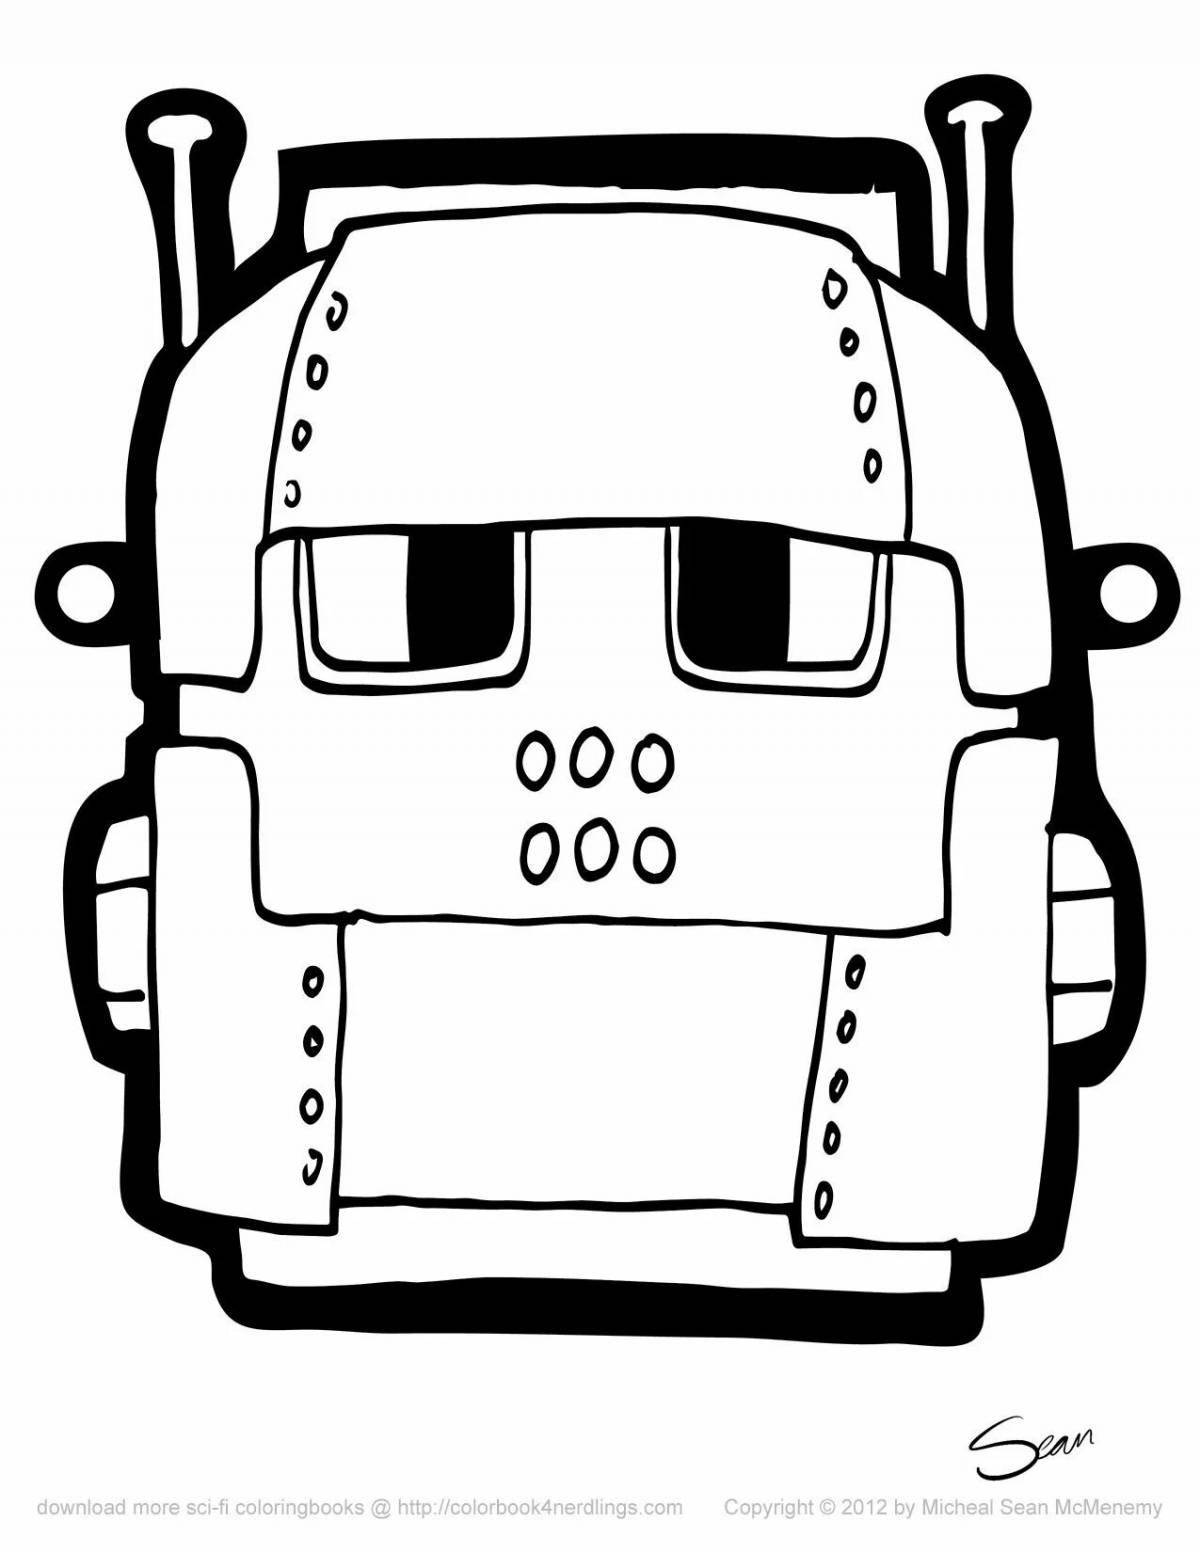 Colorful robot mask coloring picture